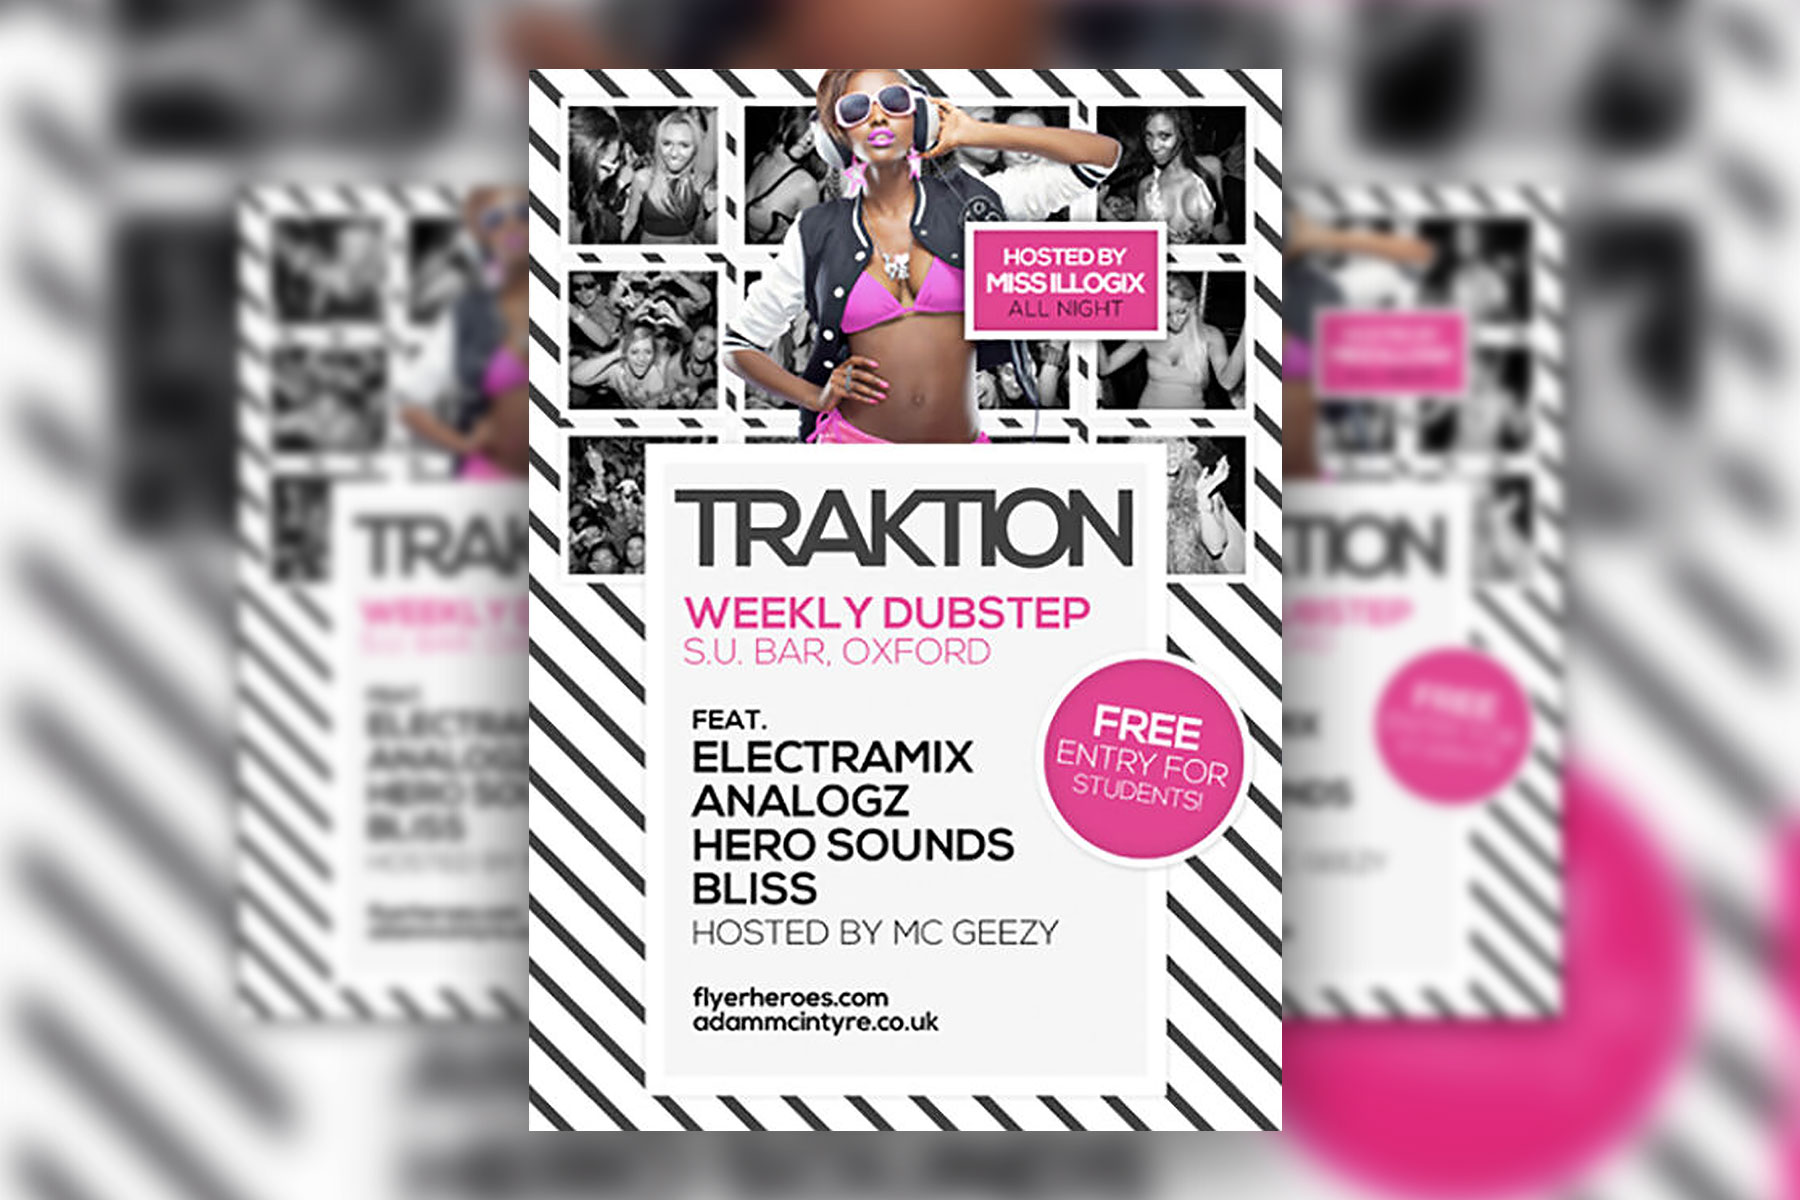 event flyer template black and white